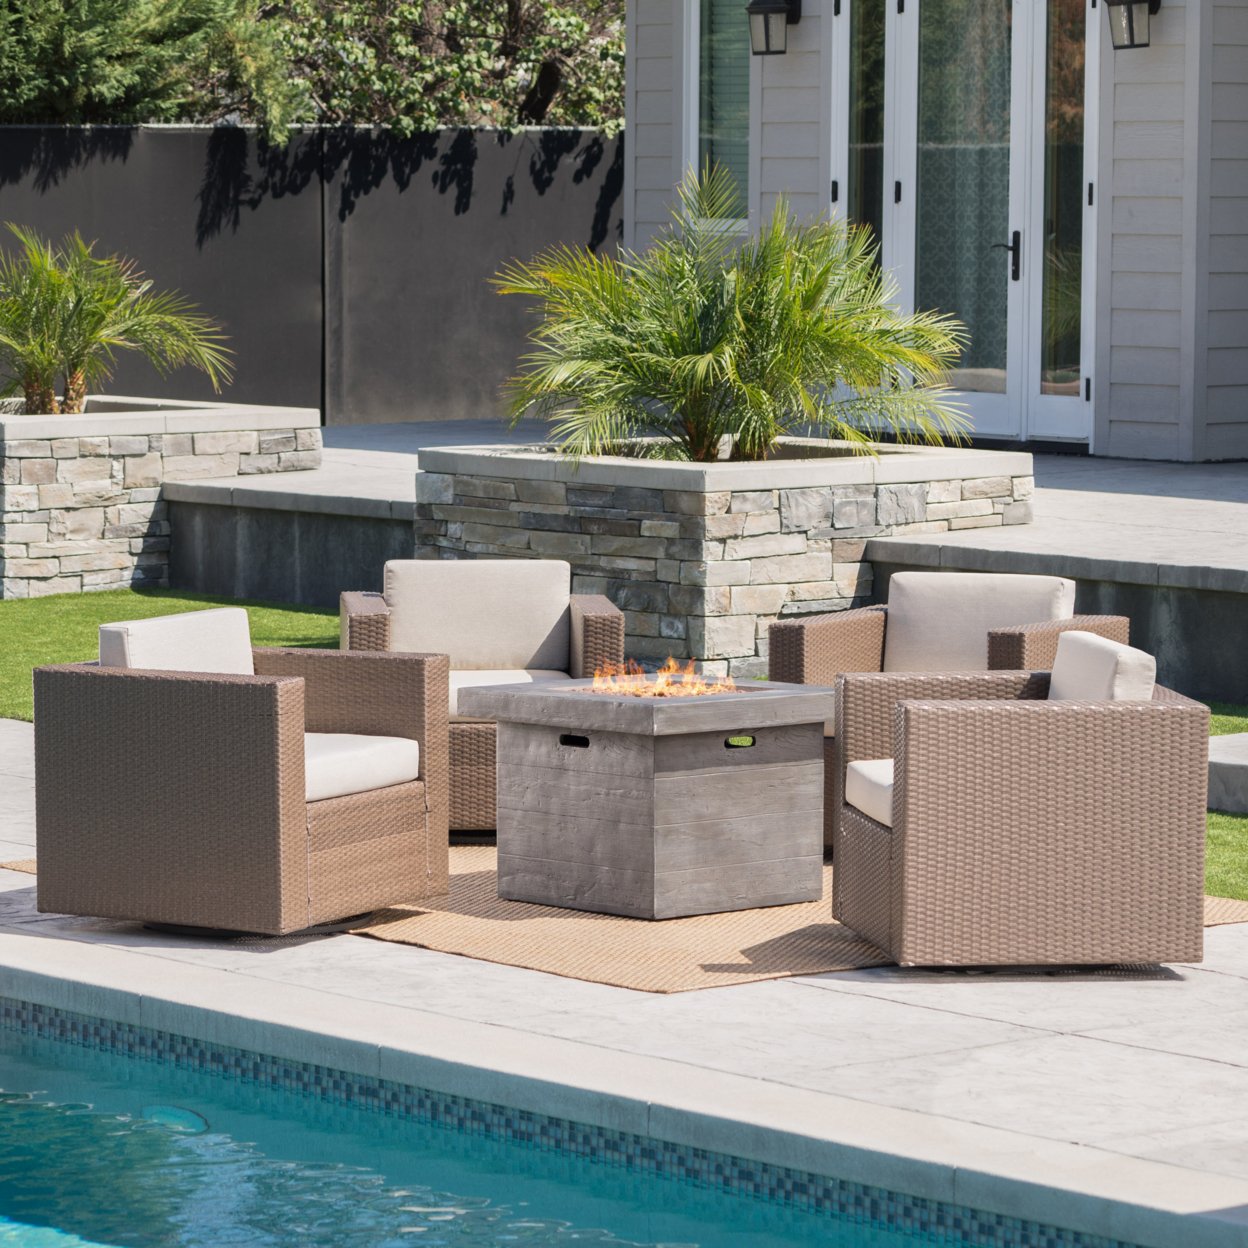 Venice Outdoor 5 Piece Chat Set With Brown Wicker Club Chairs And Fire Pit - Gray